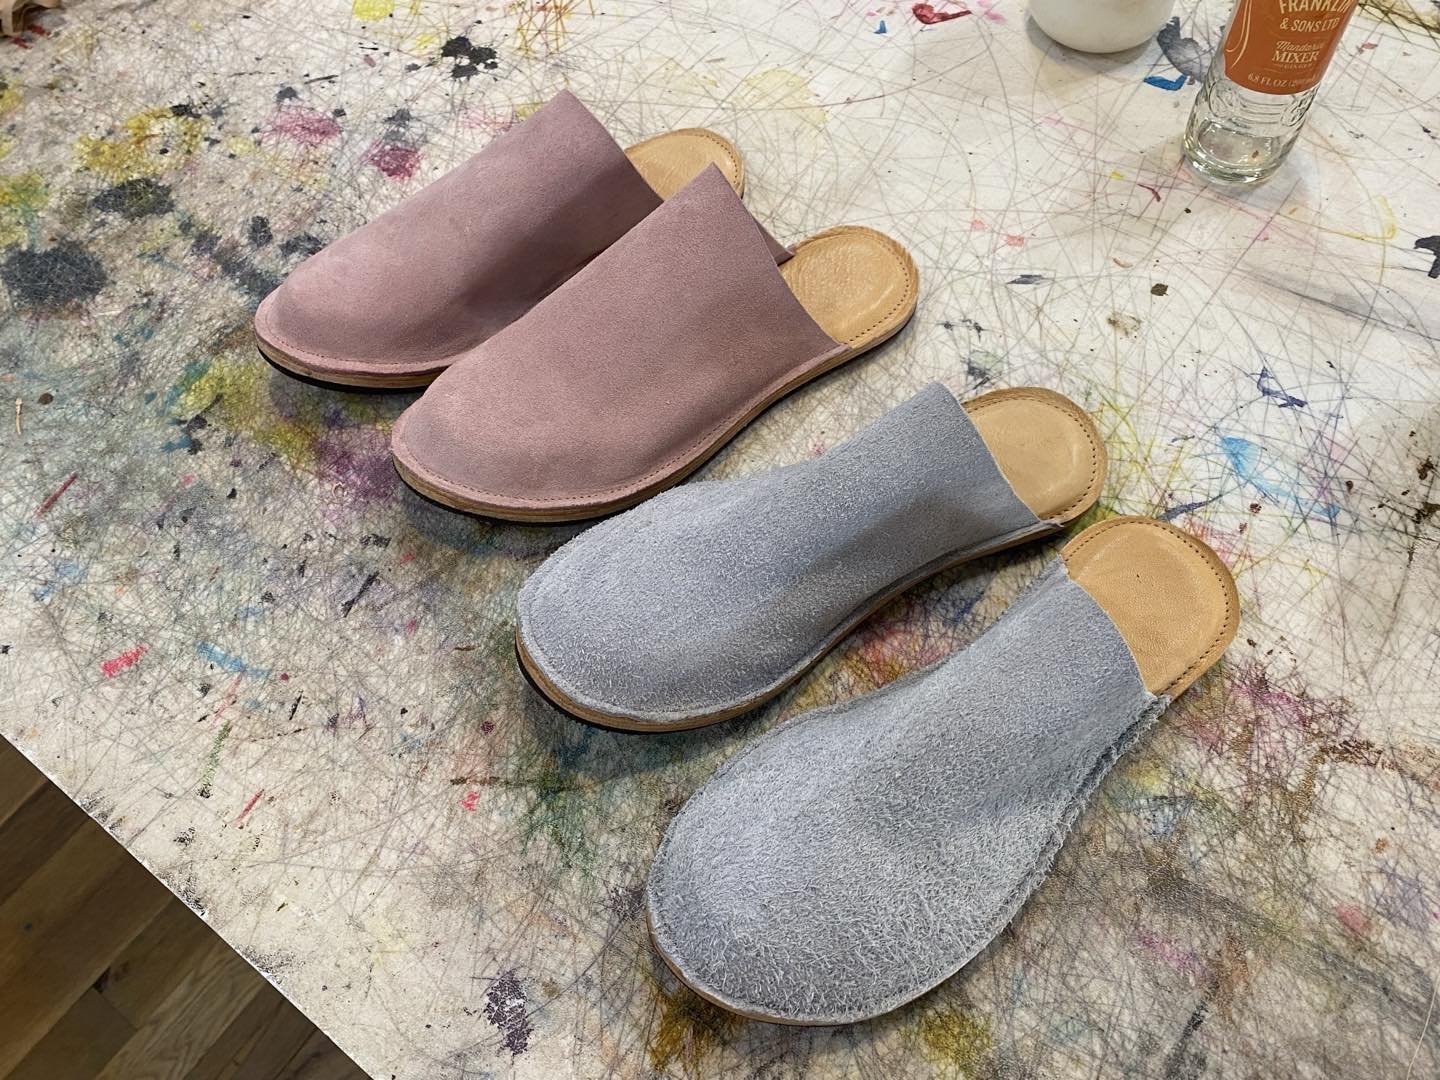 Sherry made some classy summer slides for her daughter and herself. They turned out amazing don&rsquo;t you think? #slides #coloradoshoeschool